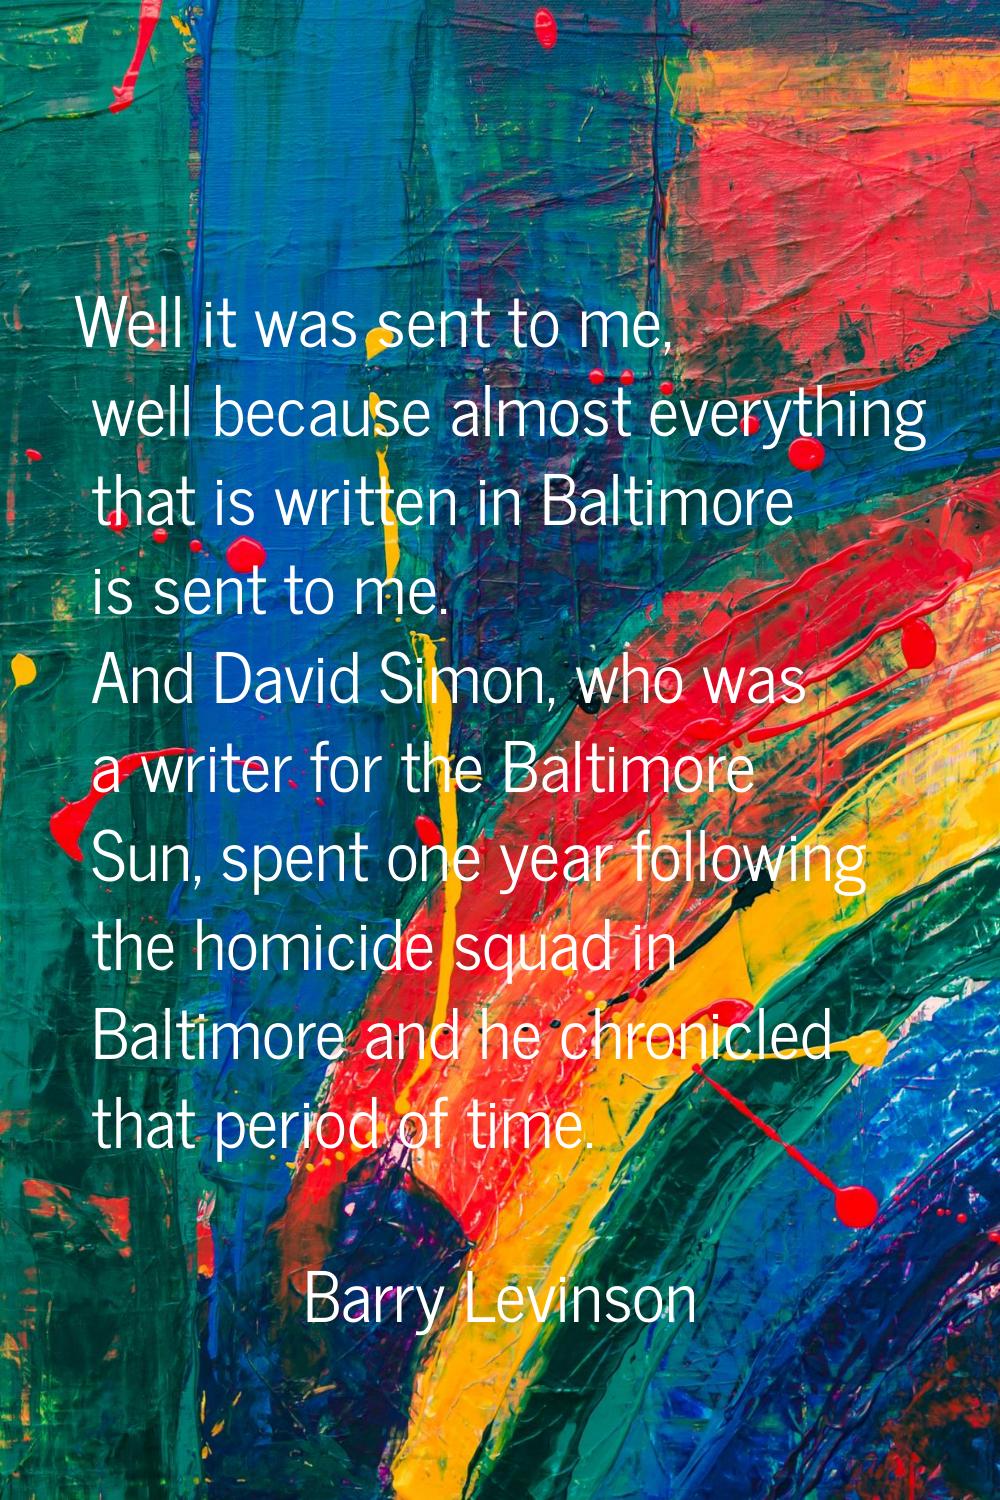 Well it was sent to me, well because almost everything that is written in Baltimore is sent to me. 